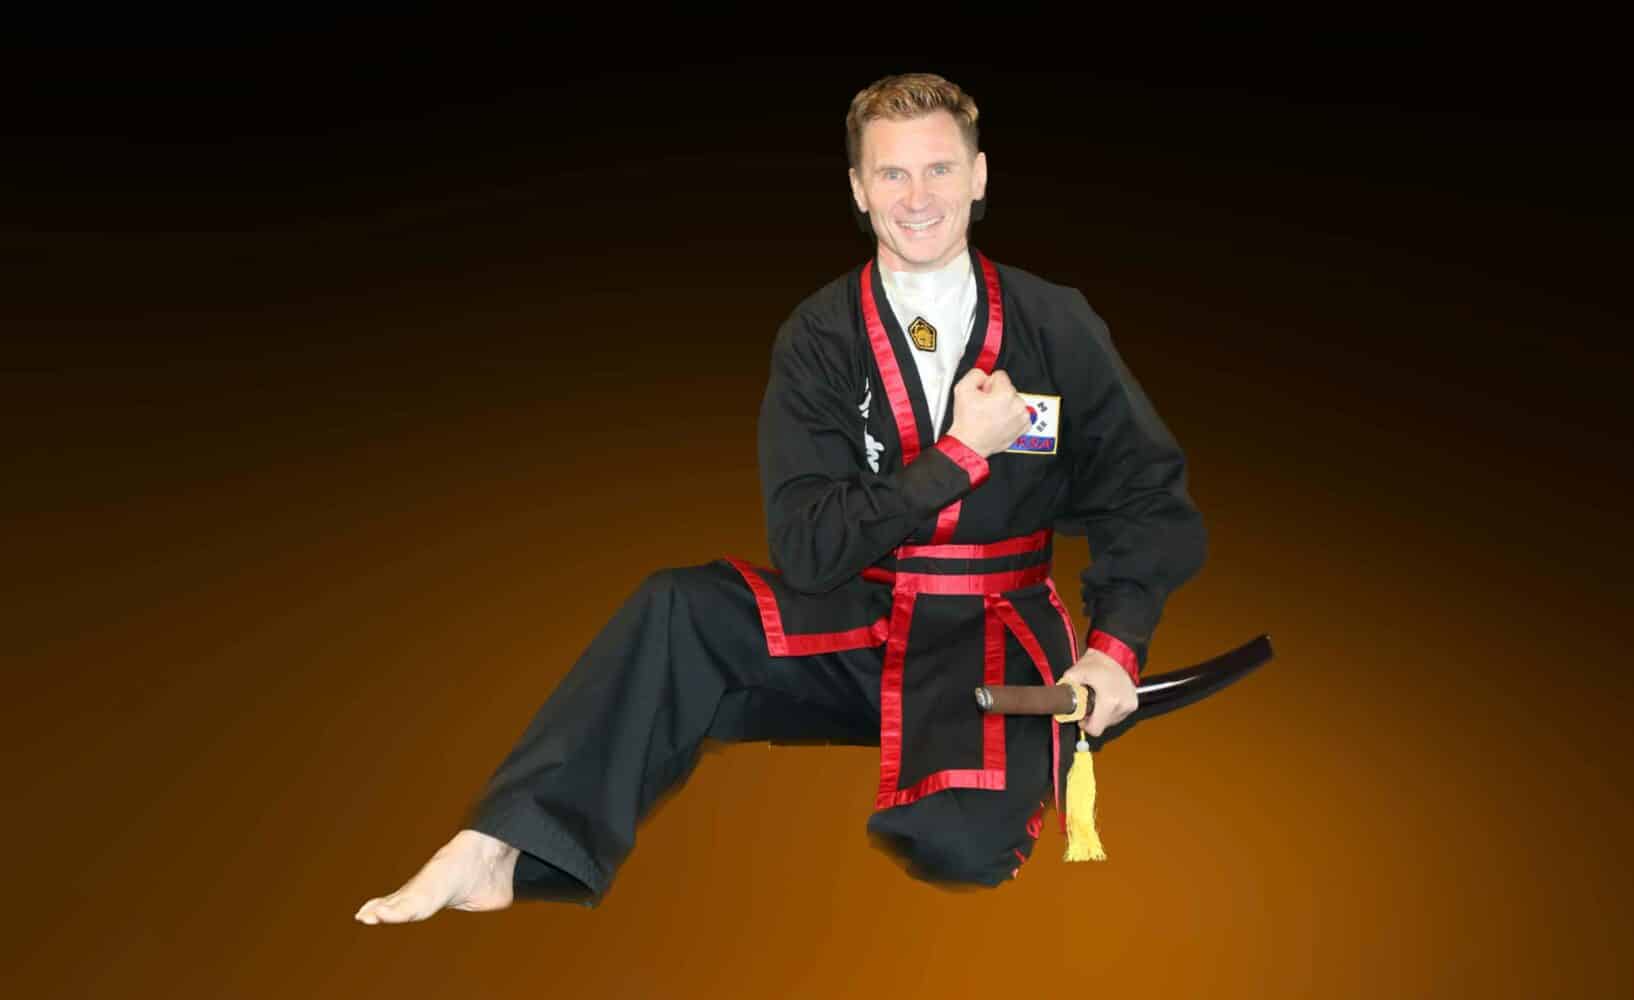 Welcome to Kuk Sool Won™ Family Martial Arts!